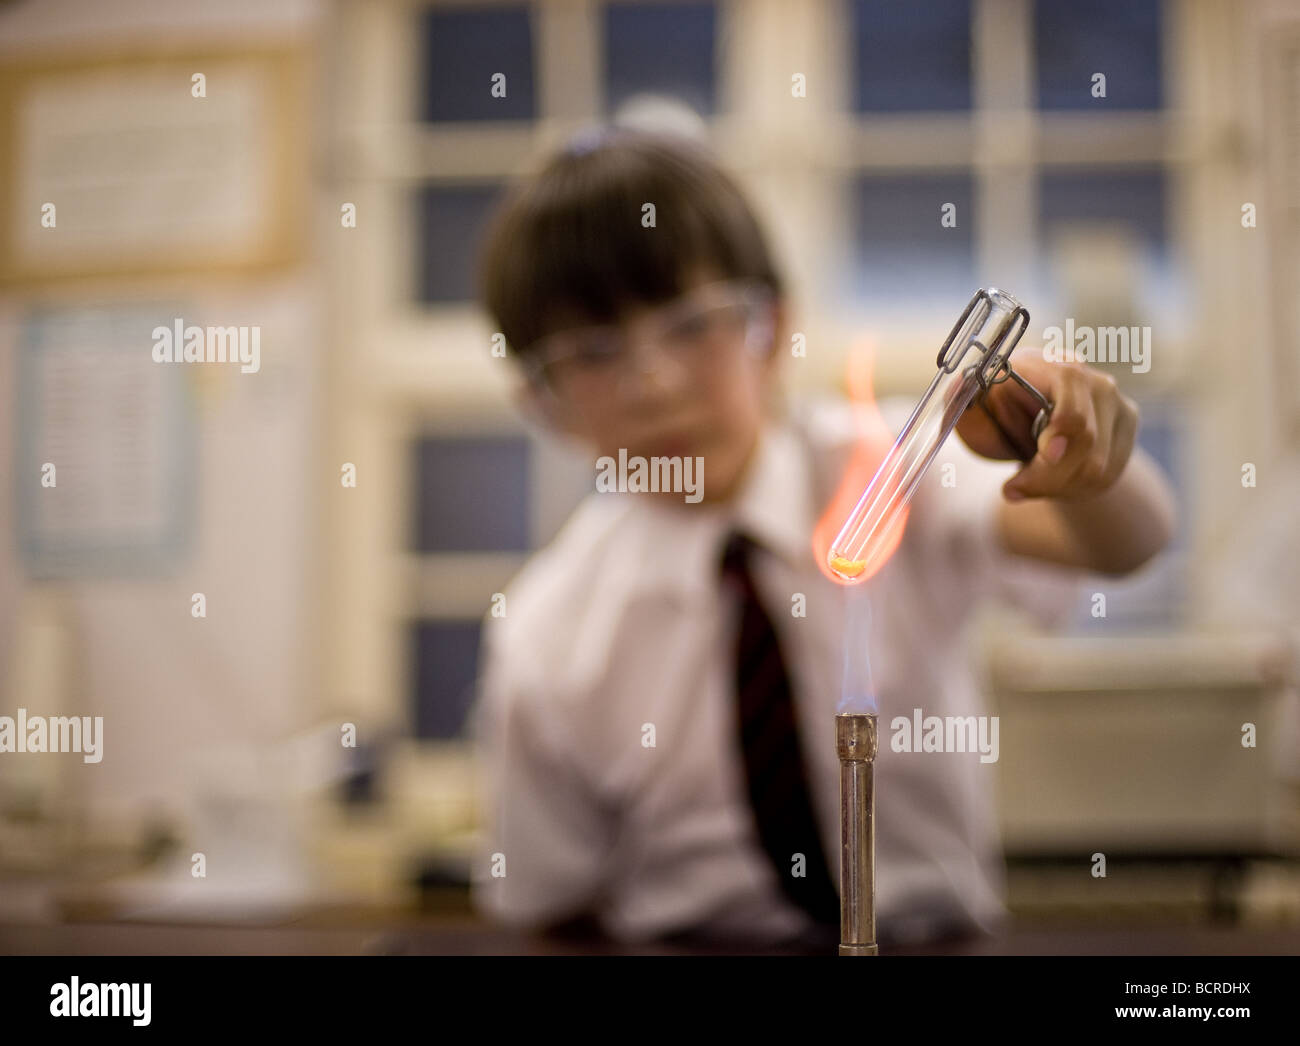 UK school - A young male student holding a test tube over the flame of a bunsen burner in a science lesson in a school. Stock Photo